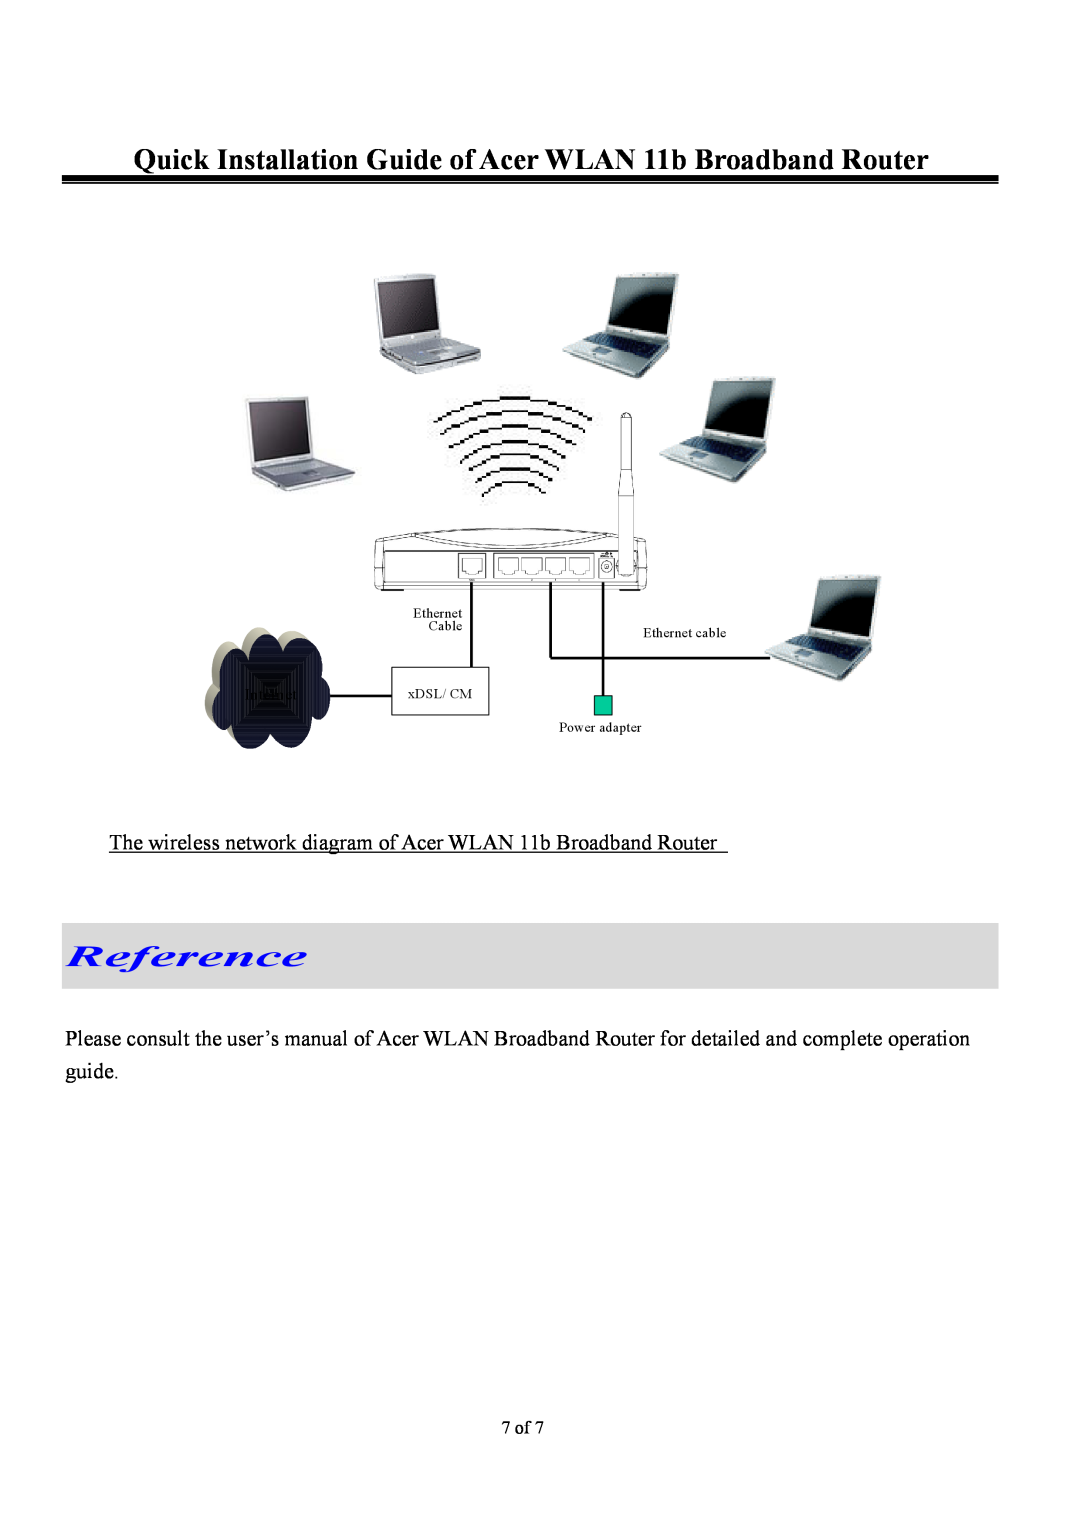 Acer Reference, Quick Installation Guide of Acer WLAN 11b Broadband Router, 7 of, Internet, Ethernet Cable xDSL/ CM 